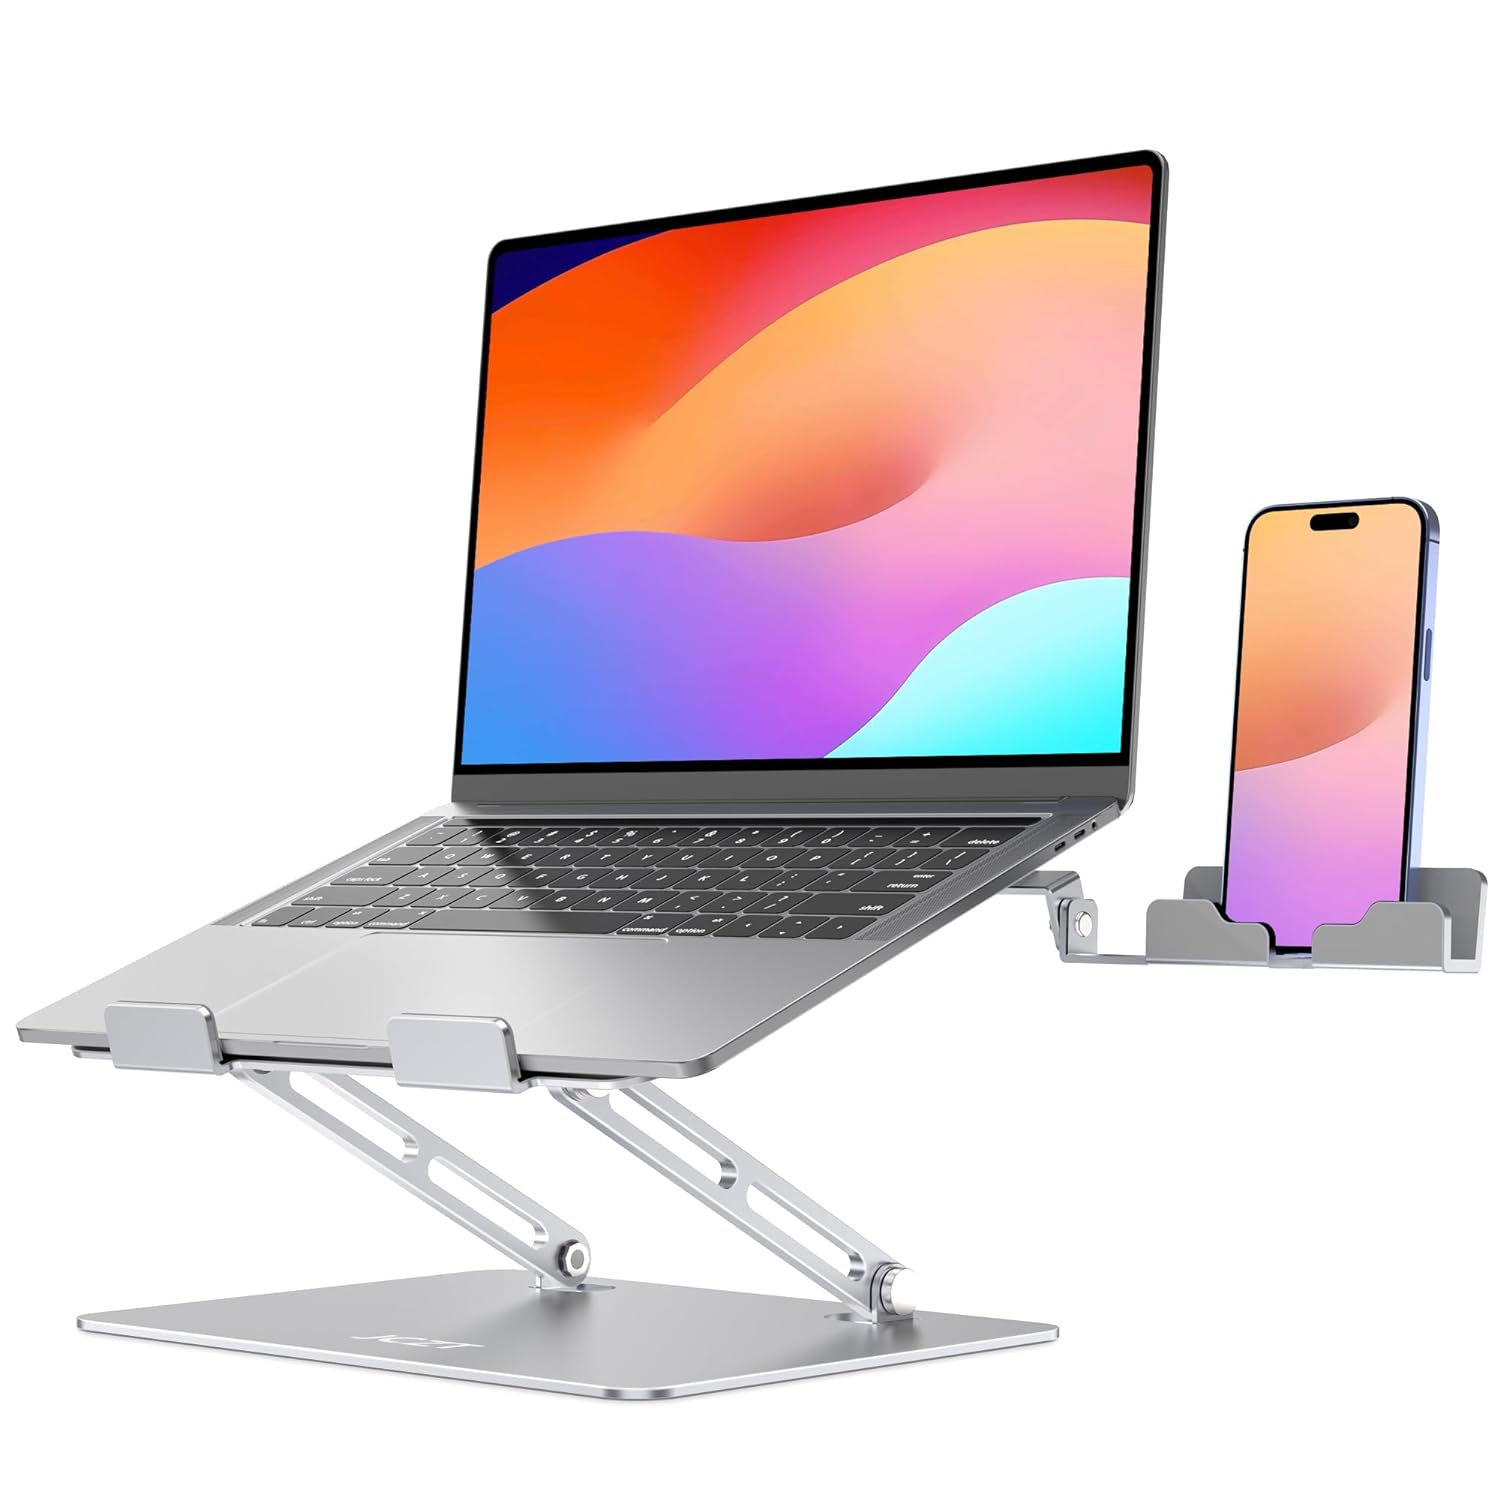 JCZT Adjustale Laptop Stand for Desk with Phone Holder, Aluminum Universal Computer Stand for Laptop, Ergonomic Laptop Riser fits All MacBook 11-16 inches, Silver